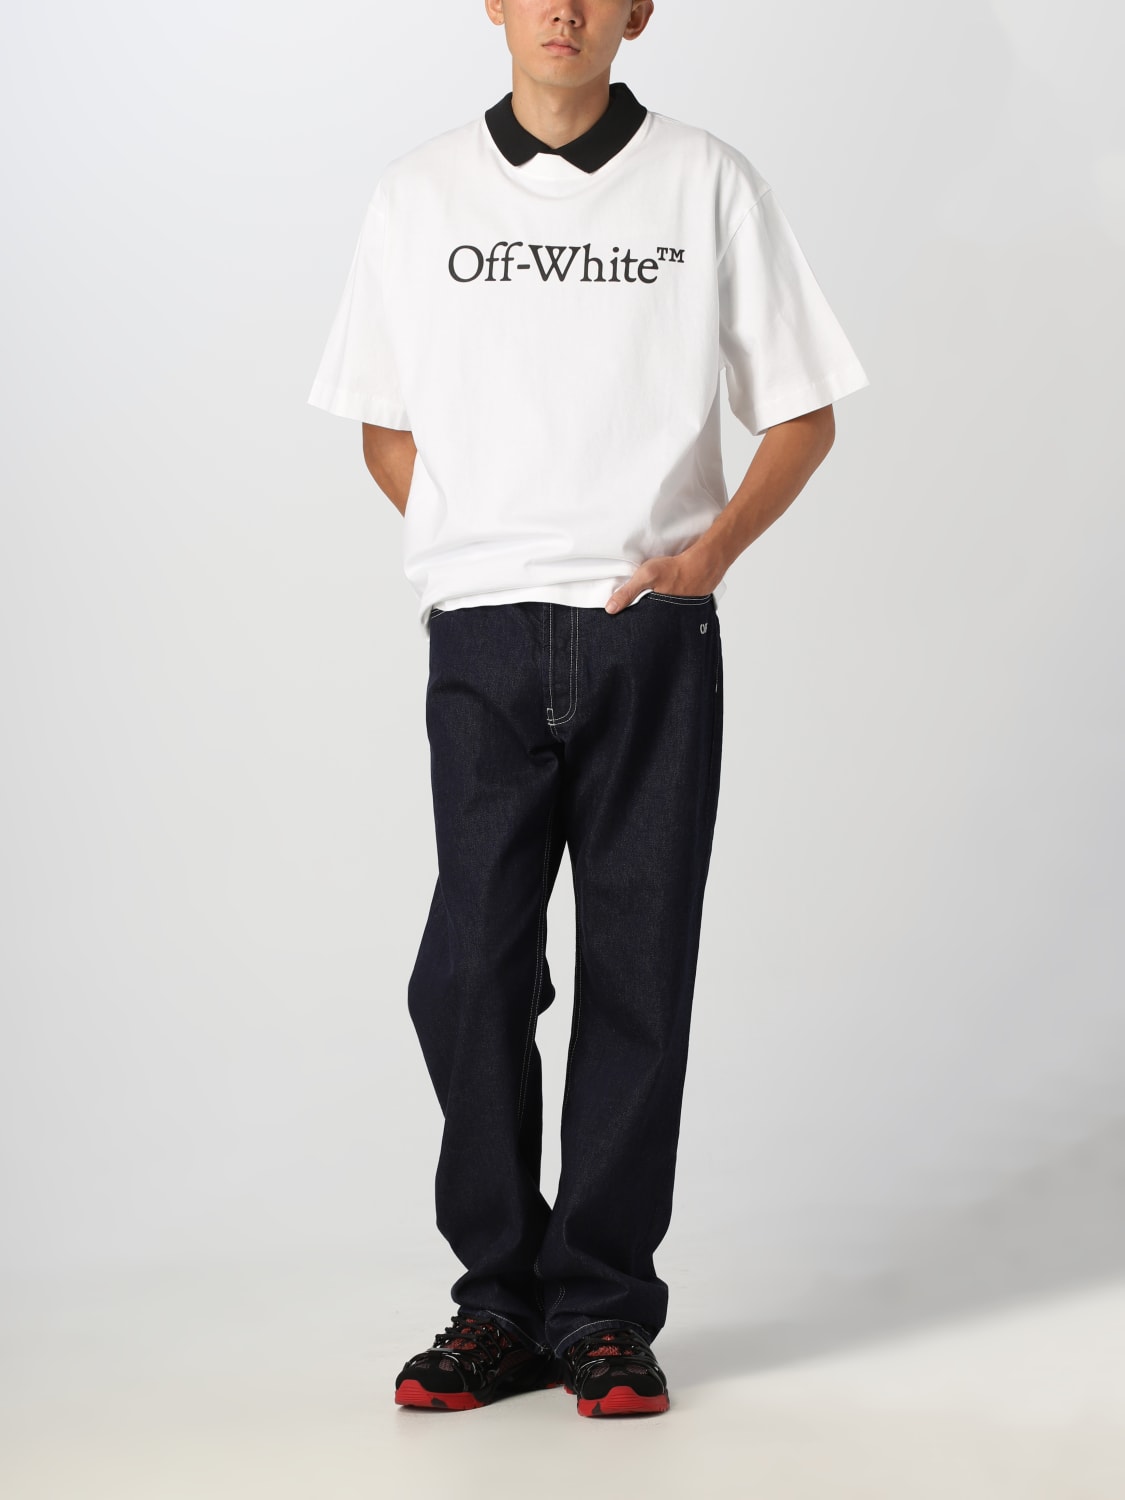 Off-White Cotton T-Shirt with Printed Logo